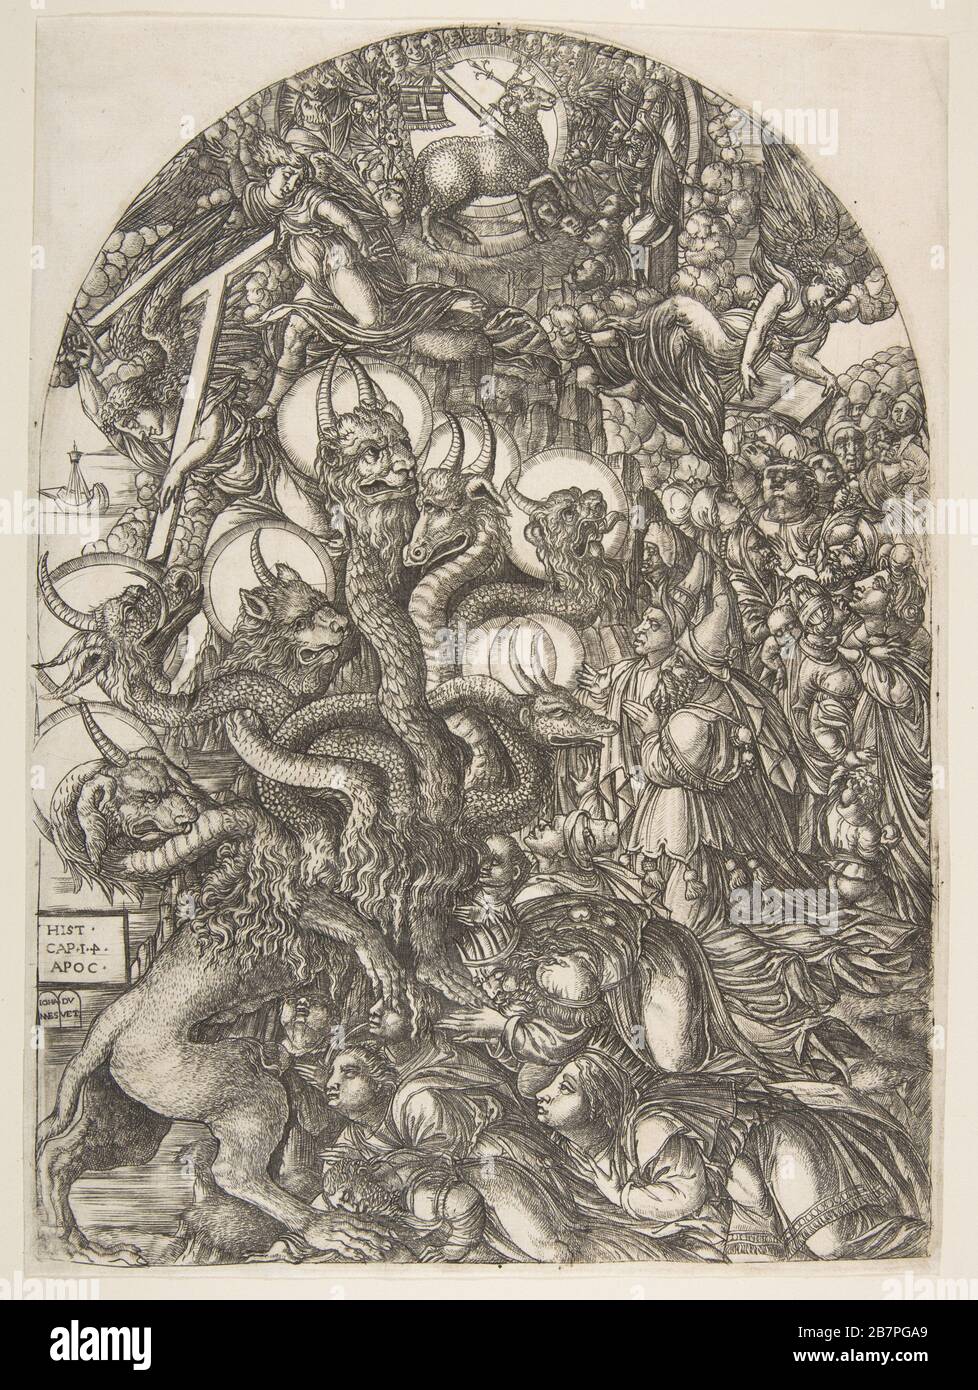 The Beast with Seven Heads and Ten Horns, from the Apocalypse.n.d. Stock Photo